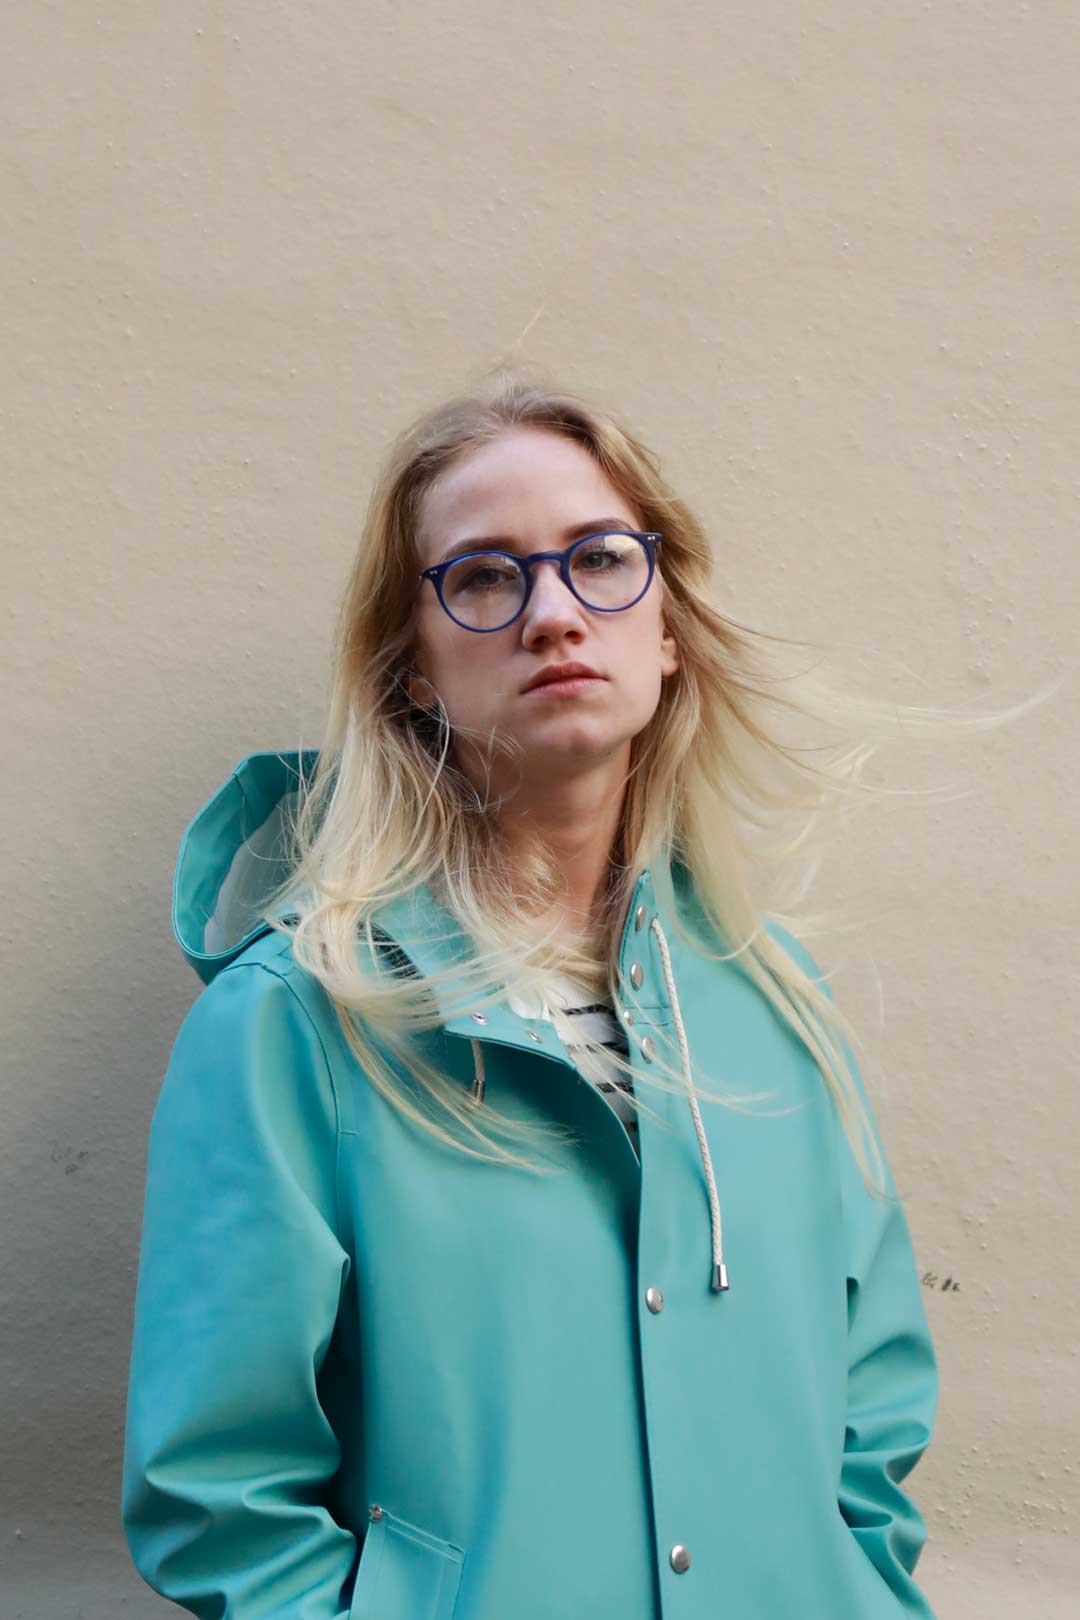 Lady with light blonde hair standing in front of wall wearing light blue jacket and round blue eyeglasses frame